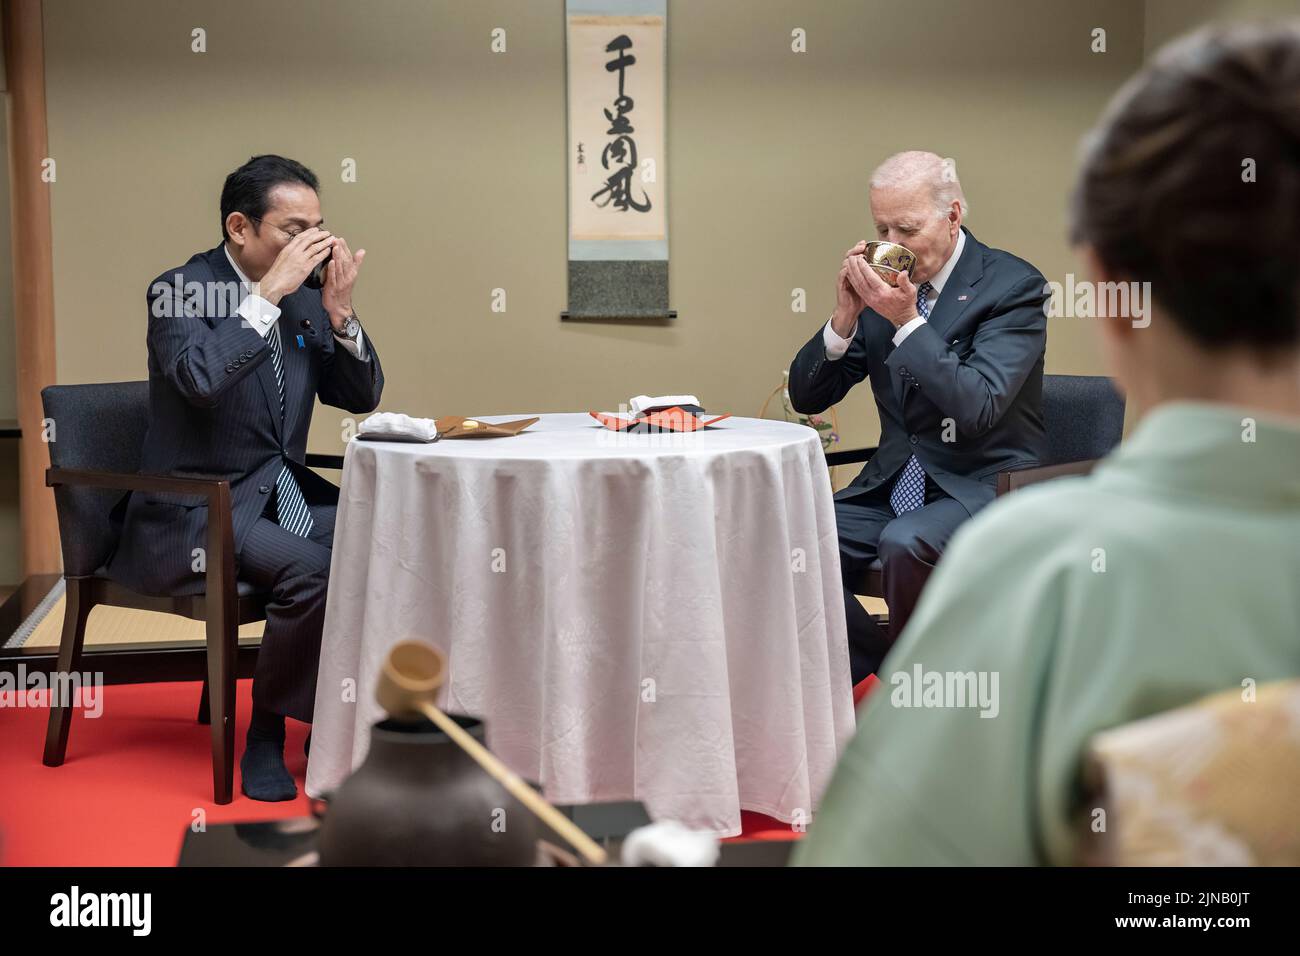 President Joe Biden attends a green tea ceremony hosted by Japanese Prime Minister Kishida Fumio and his wife Yuko Kishida, Monday, May 23, 2022, at Kochuan restaurant in Tokyo. (Official White House Photo by Adam Schultz) Stock Photo